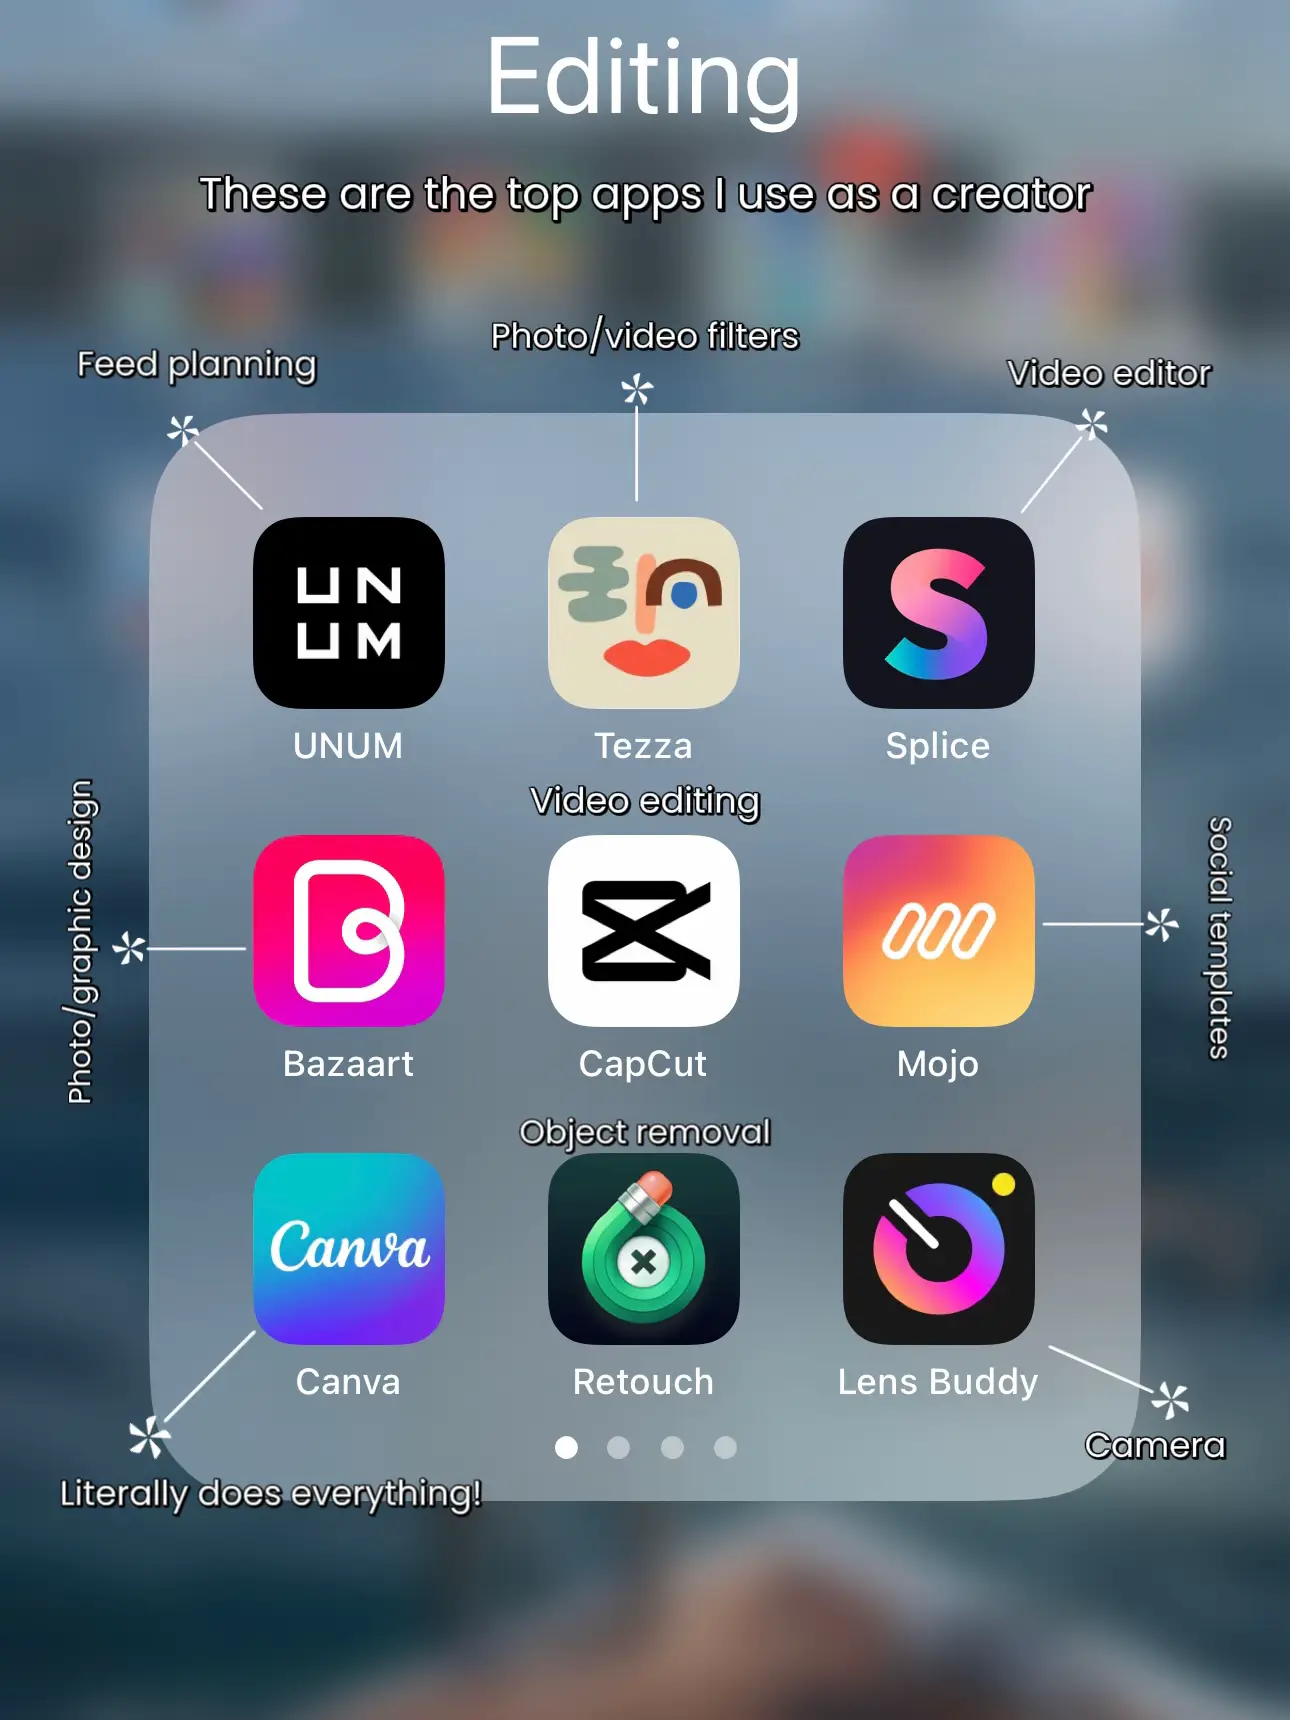  A list of the top apps